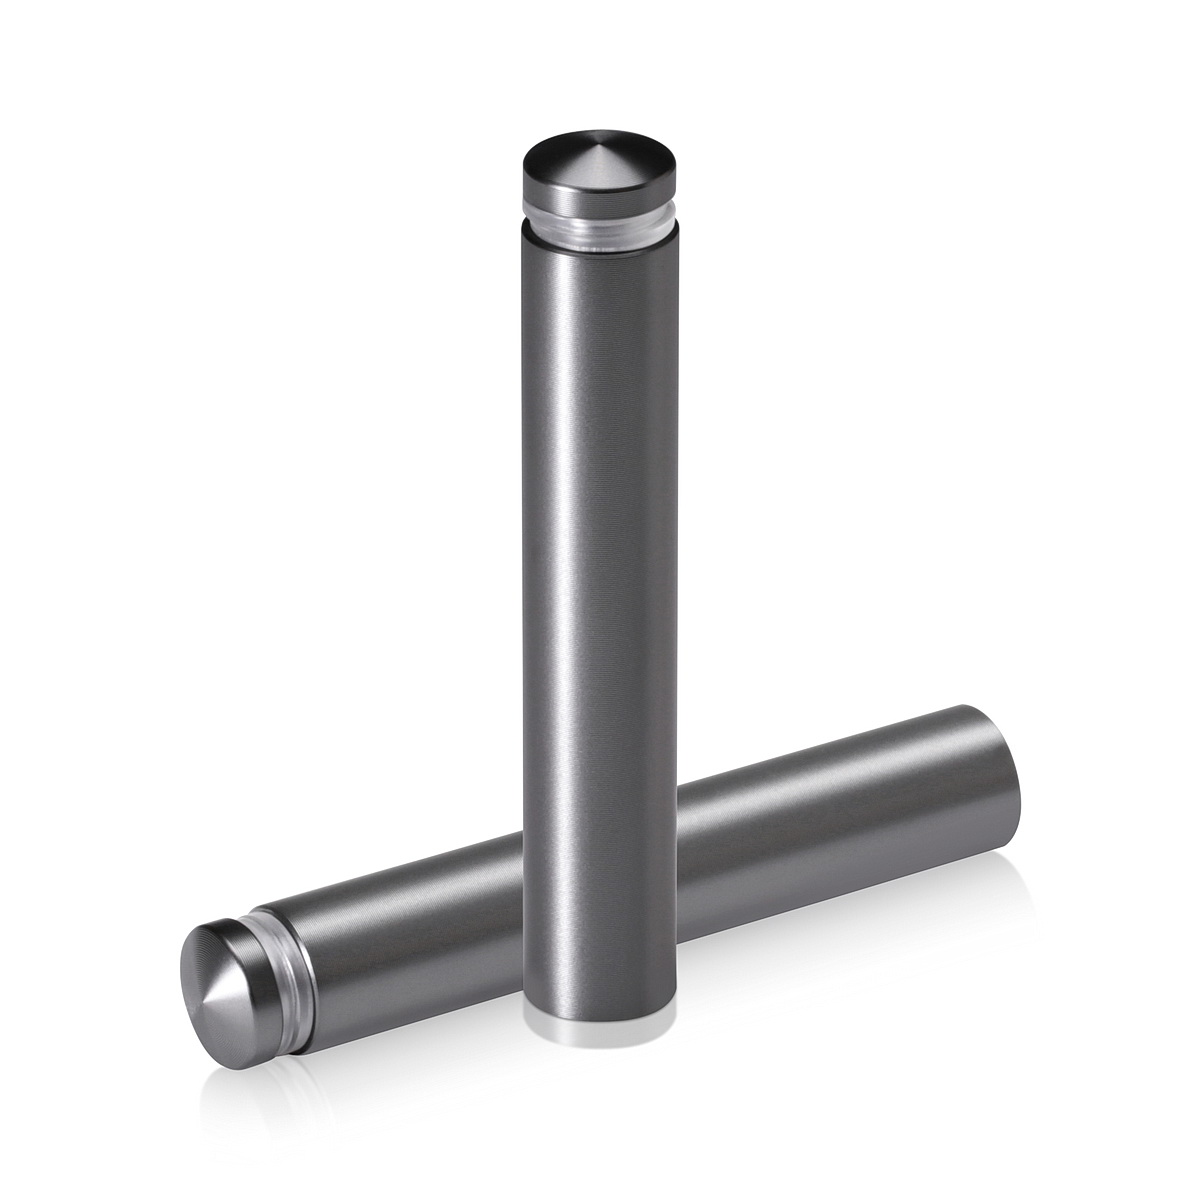 1/2'' Diameter X 2-1/2'' Barrel Length, Aluminum Rounded Head Standoffs, Titanium Anodized Finish Easy Fasten Standoff (For Inside / Outside use) [Required Material Hole Size: 3/8'']